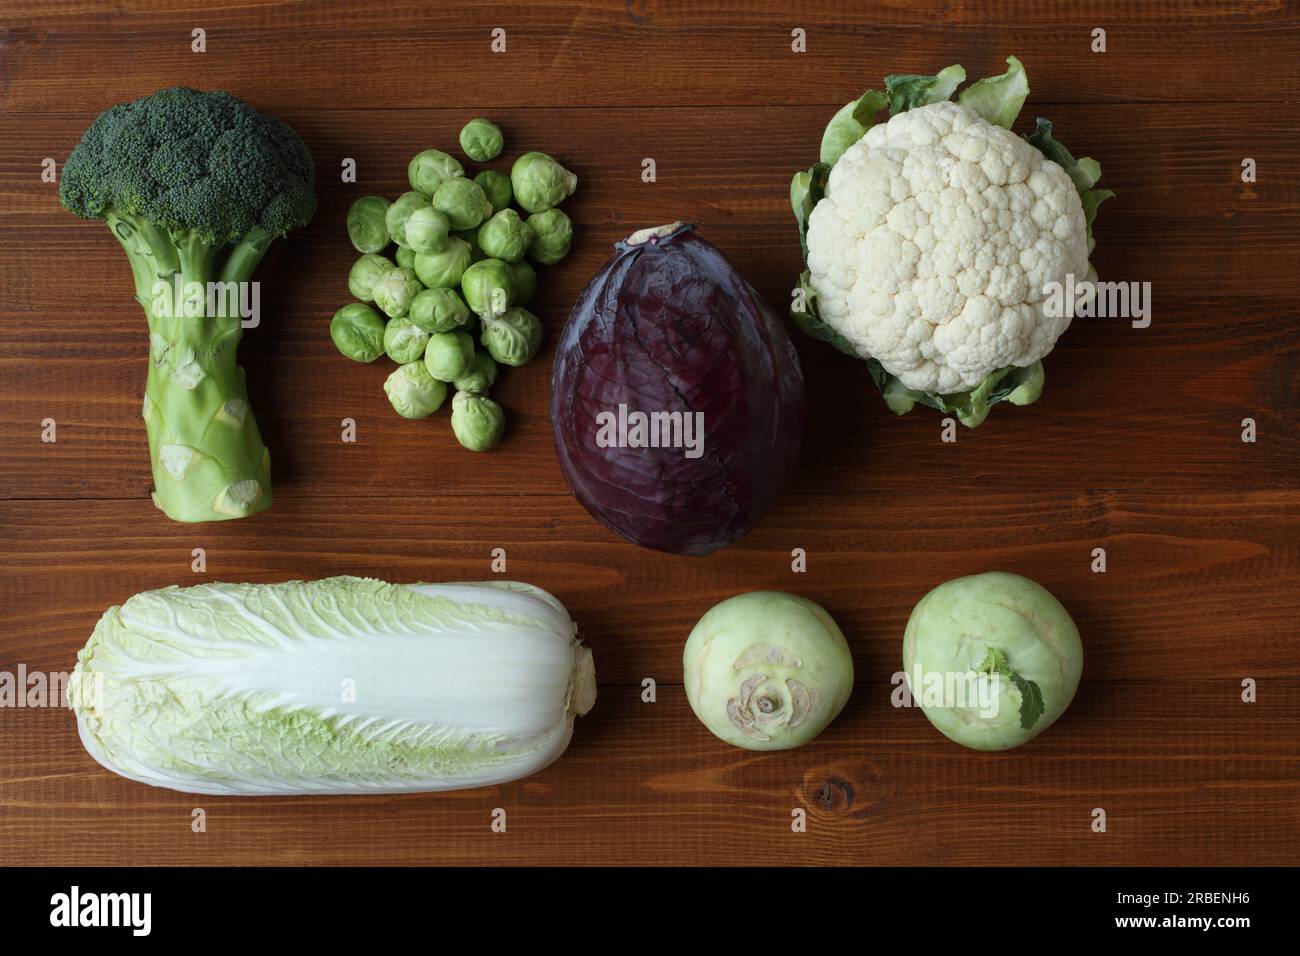 Different types of cabbage on a brown wooden table. View from above. Closeup. Broccoli, Brussels sprouts, kohlrabi, cauliflower, red cabbage, Chinese Stock Photo